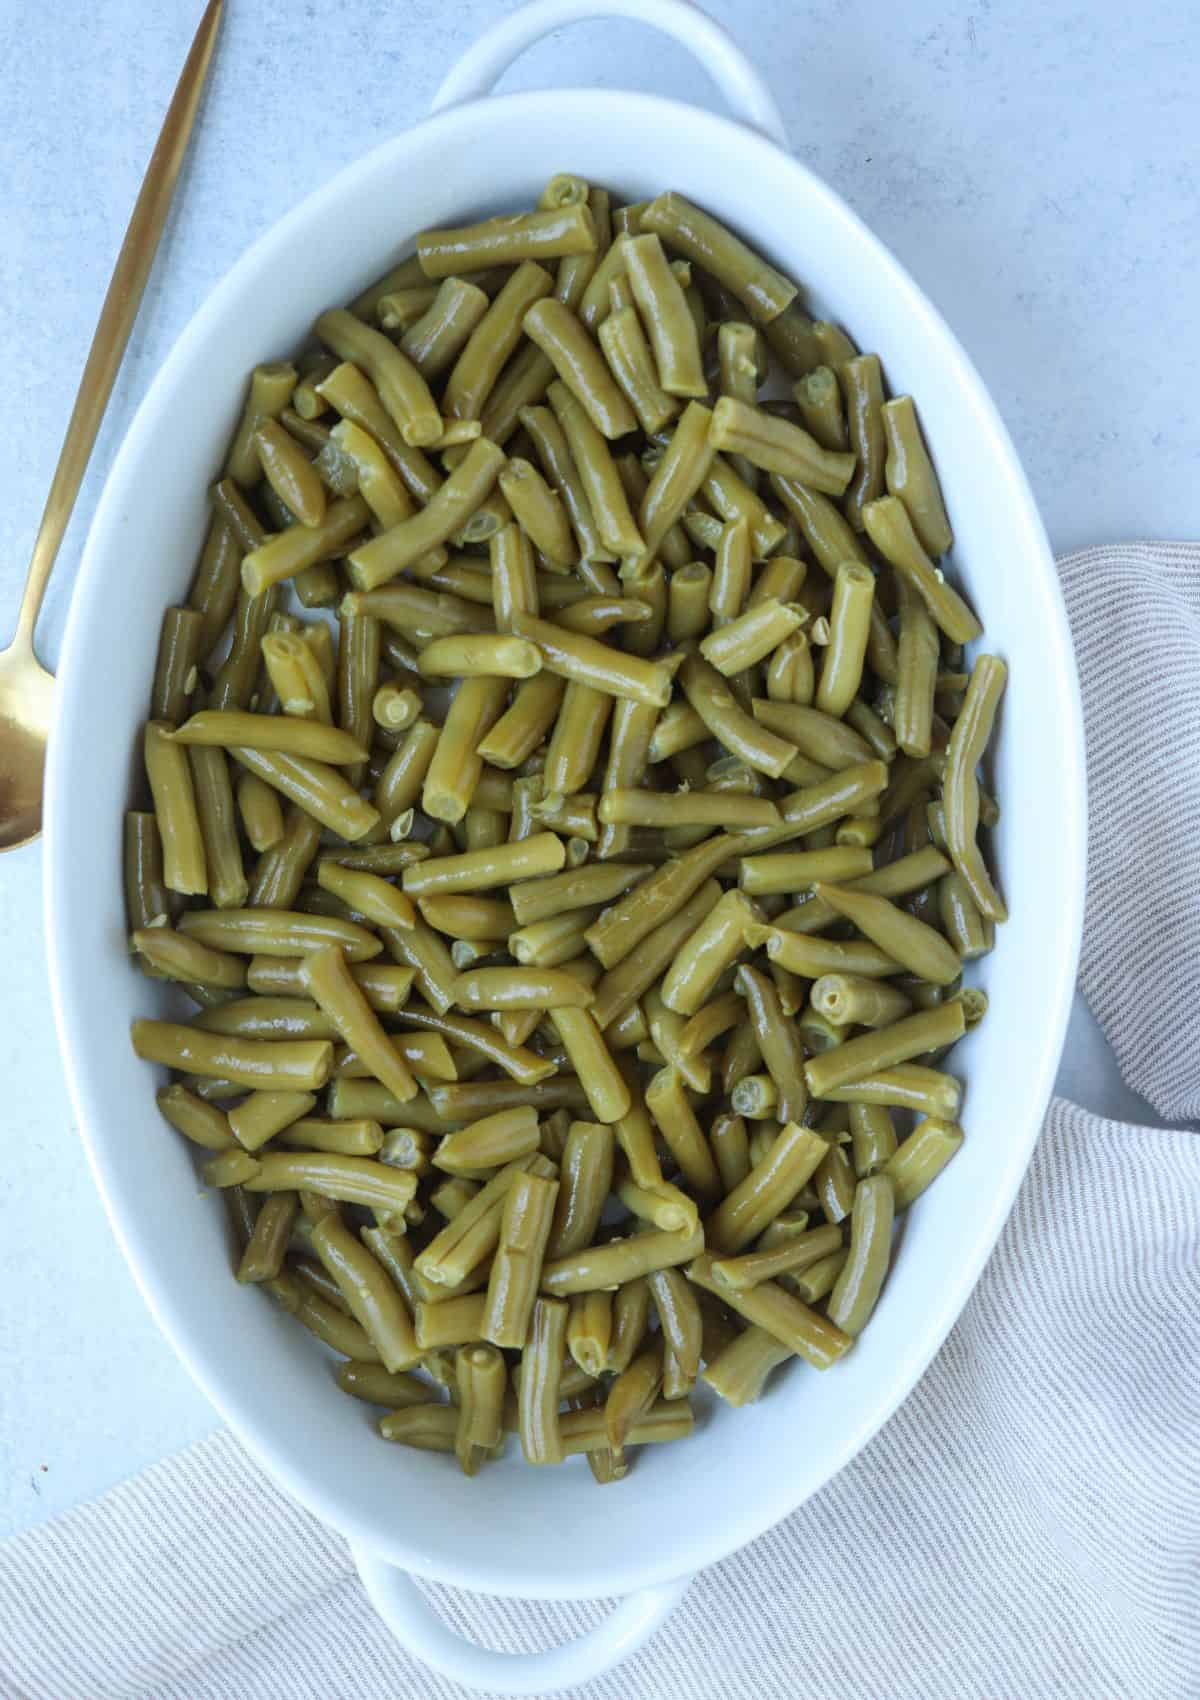 canned green beans in a white oval casserole dish.